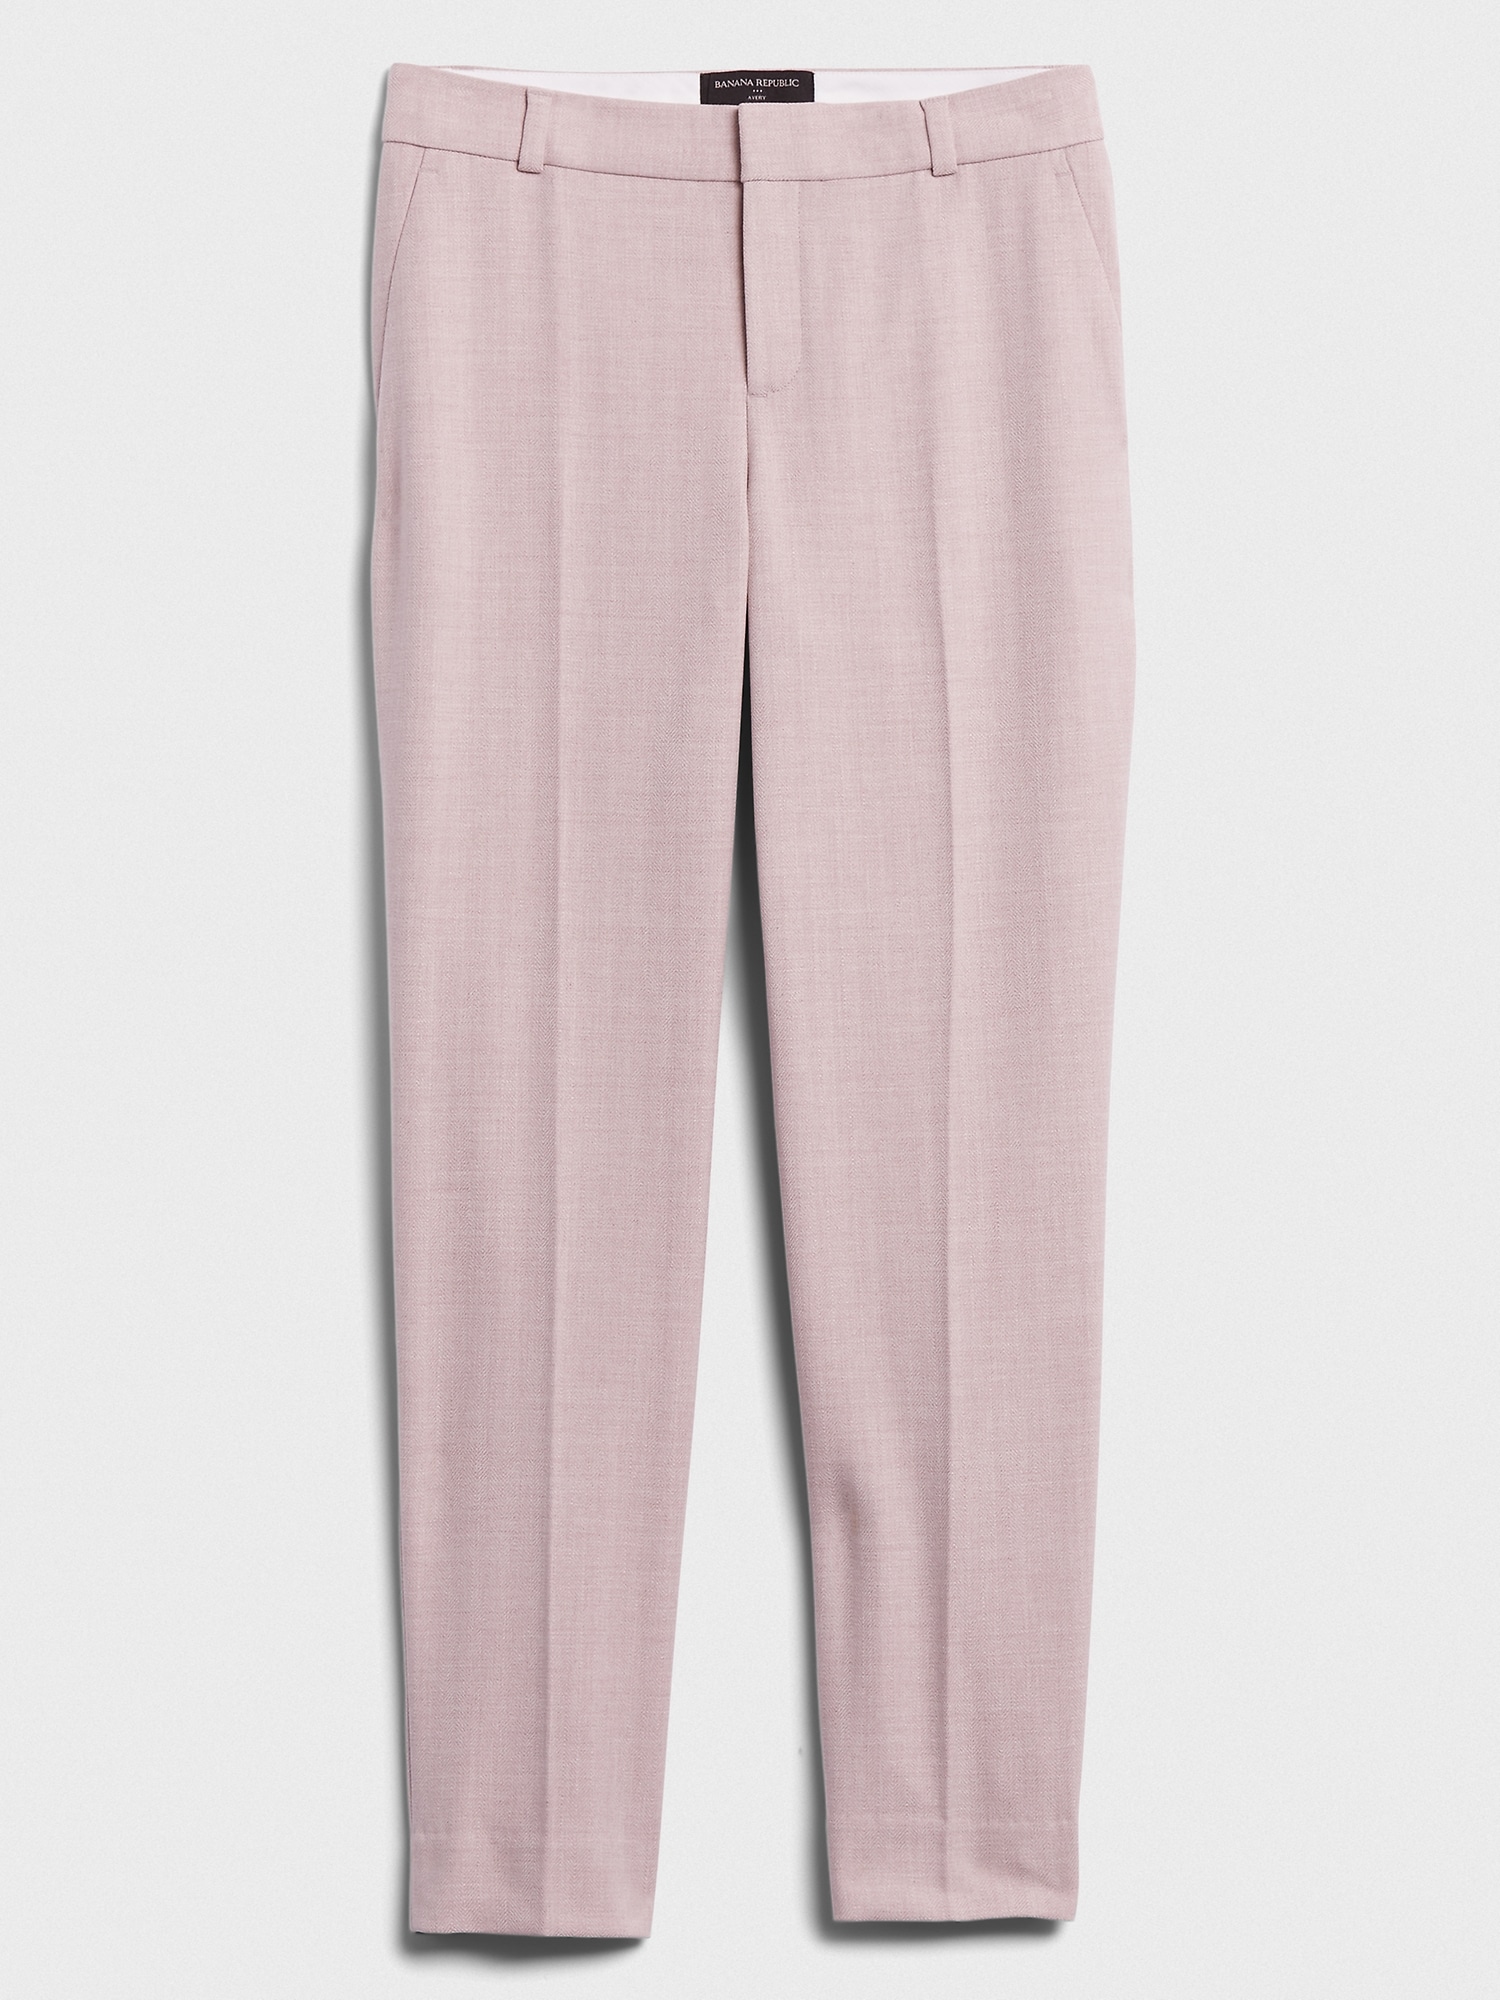 Avery Tailored Ankle Pant